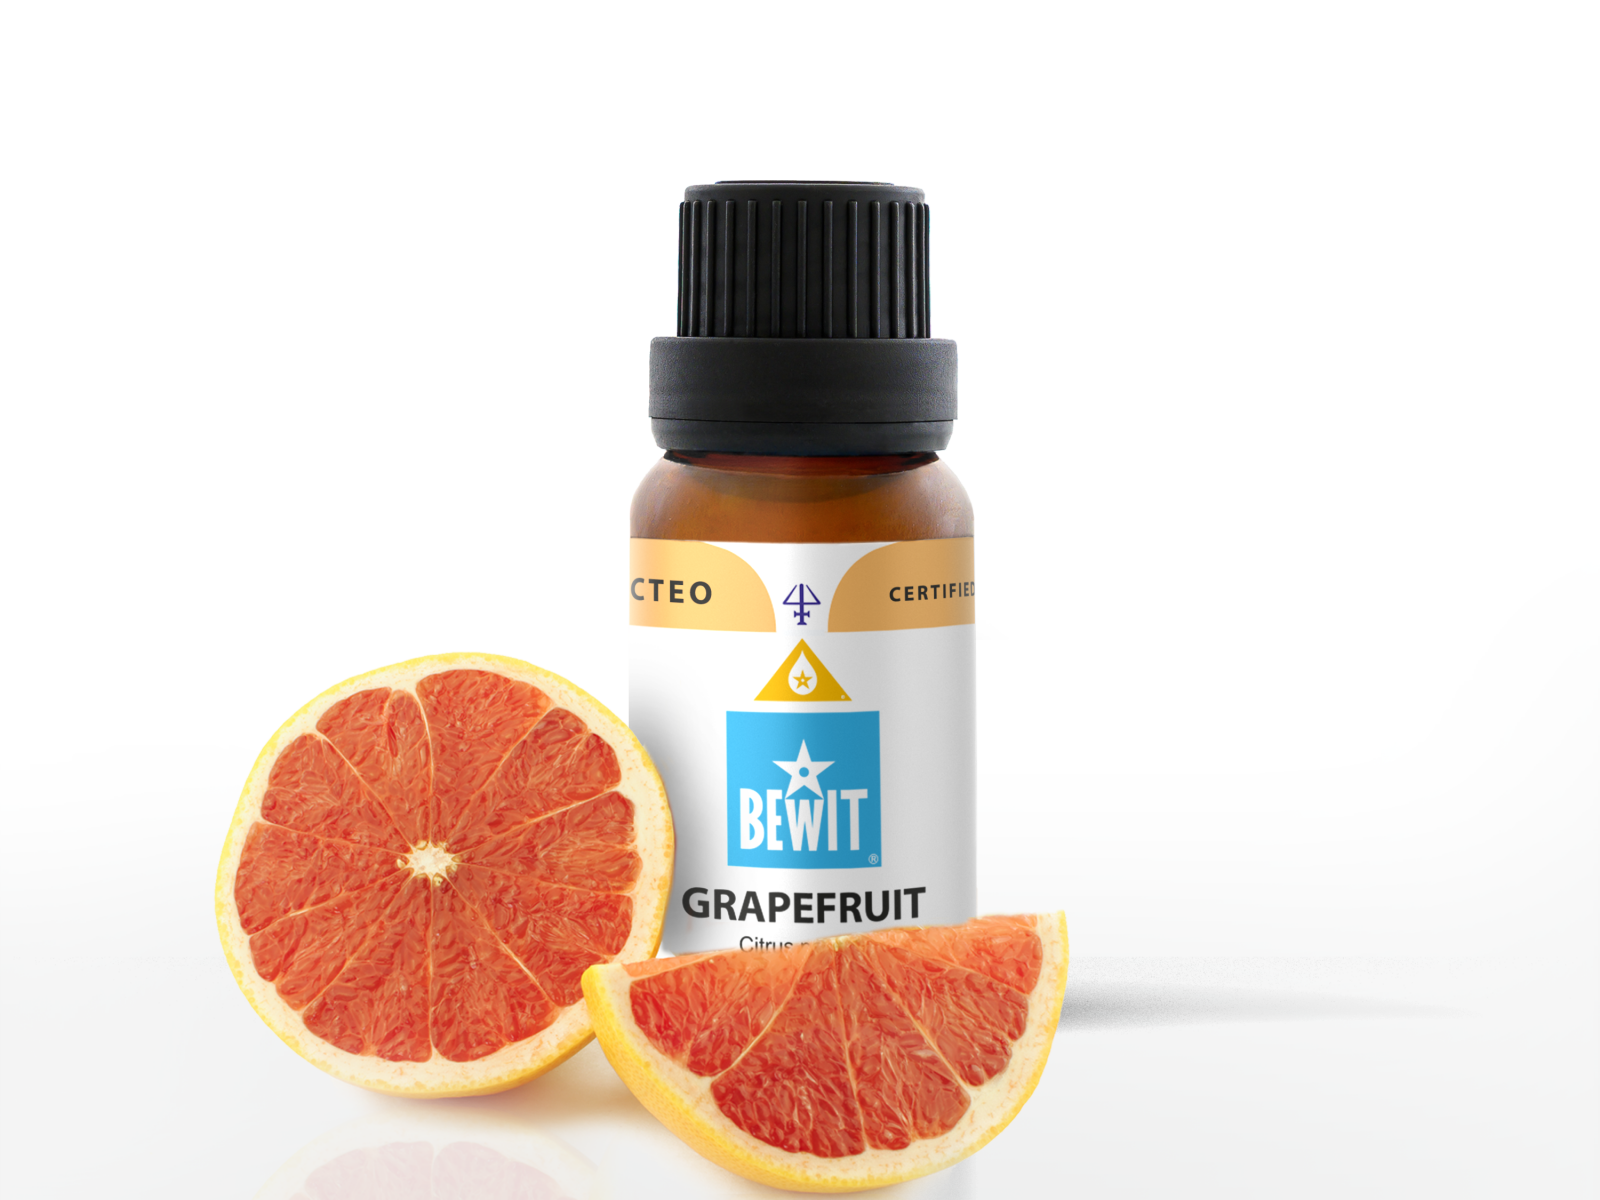 Grapefruit - It is a 100% pure essential oil